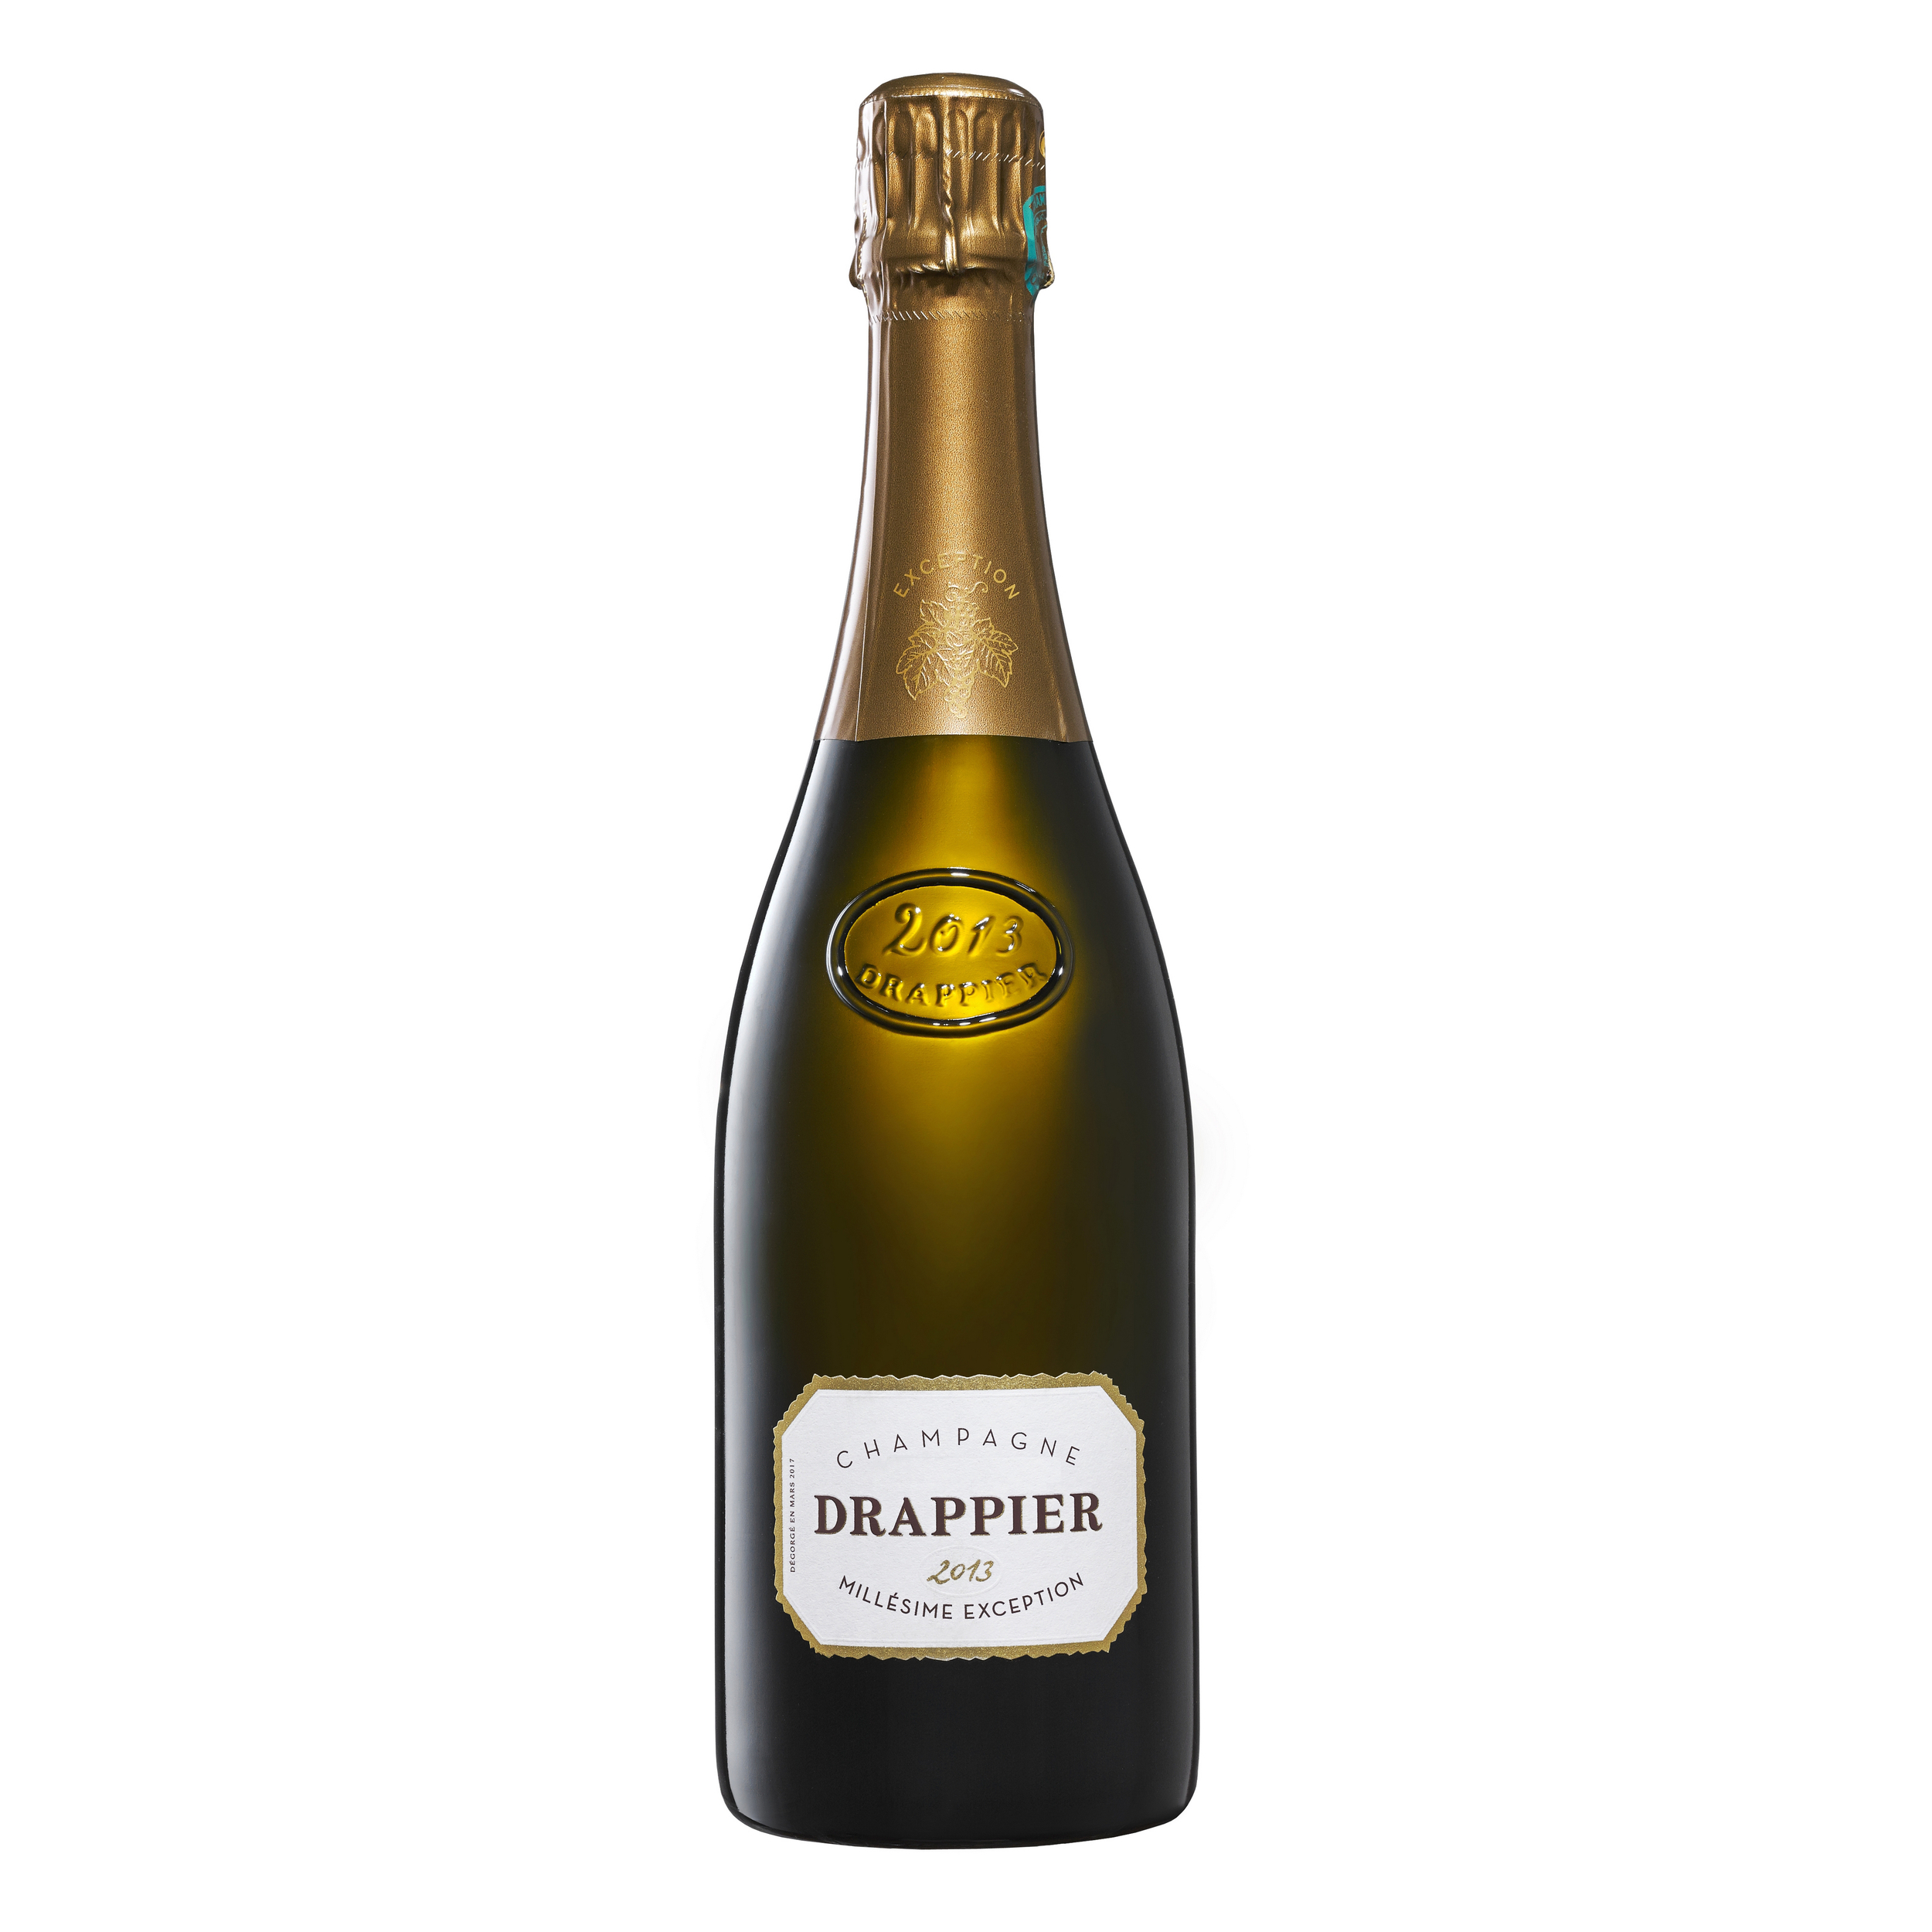 Champagne-Drappier-millesime-exception-2013